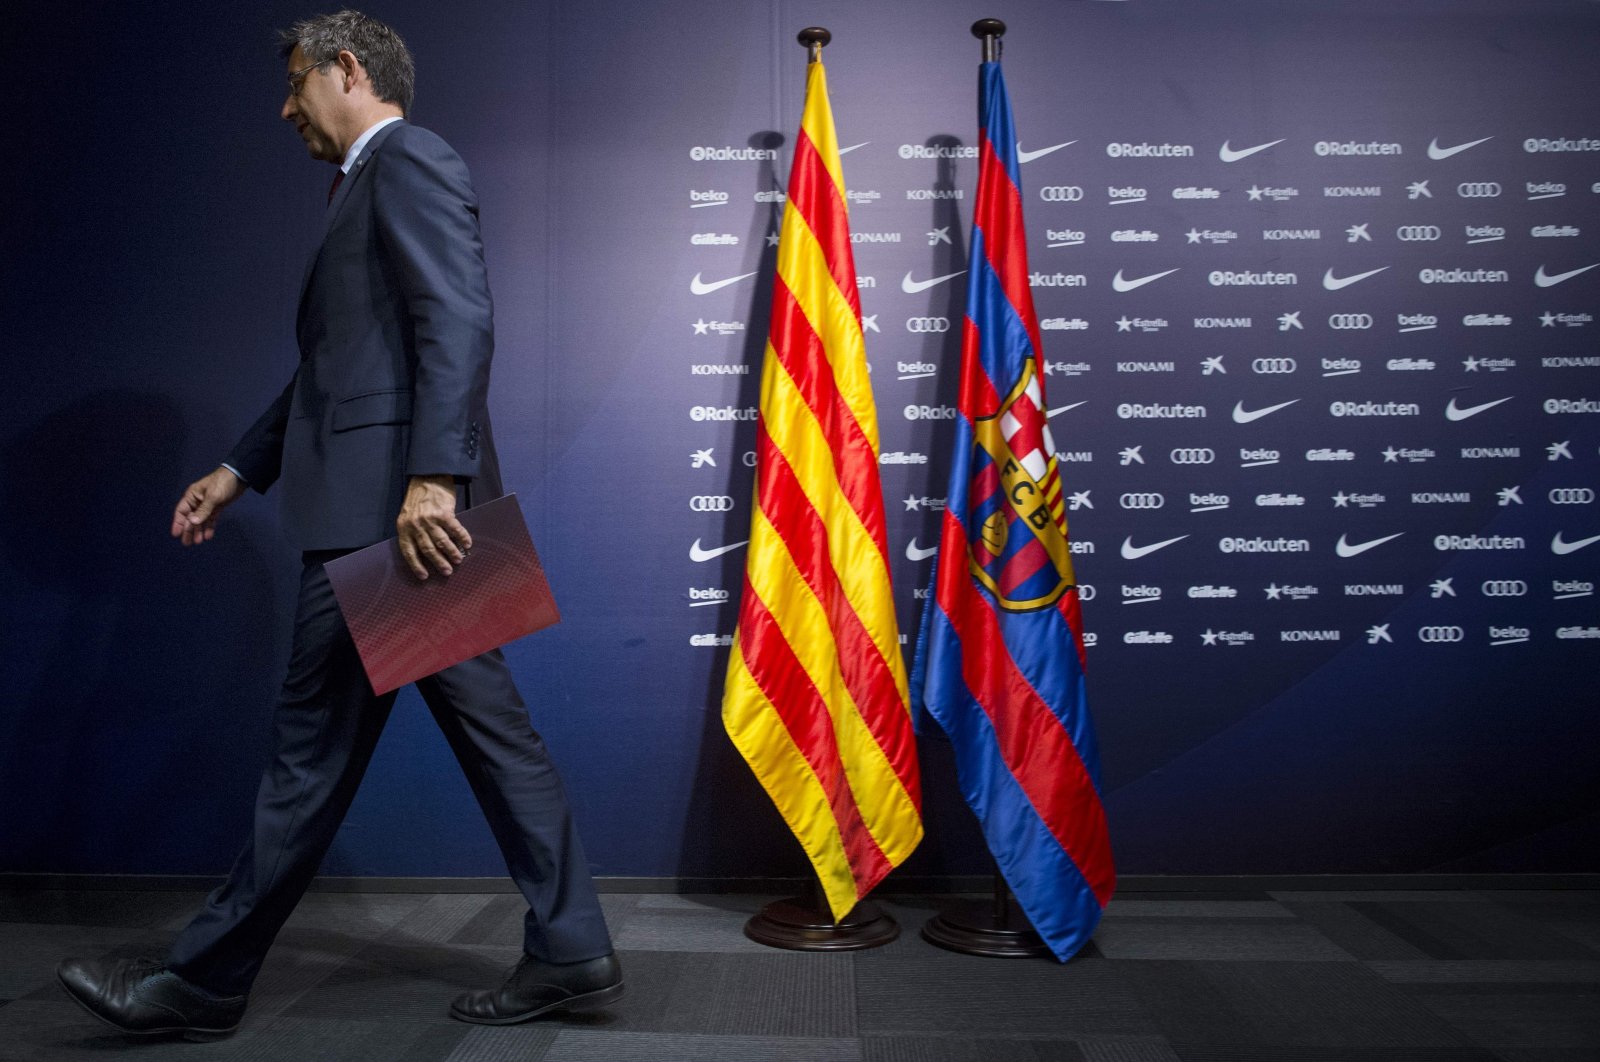 FC Barcelona's President Josep Maria Bartomeu leaves following a news conference at the Camp Nou in Barcelona, Spain, Oct. 2, 2017. (AFP Photo)